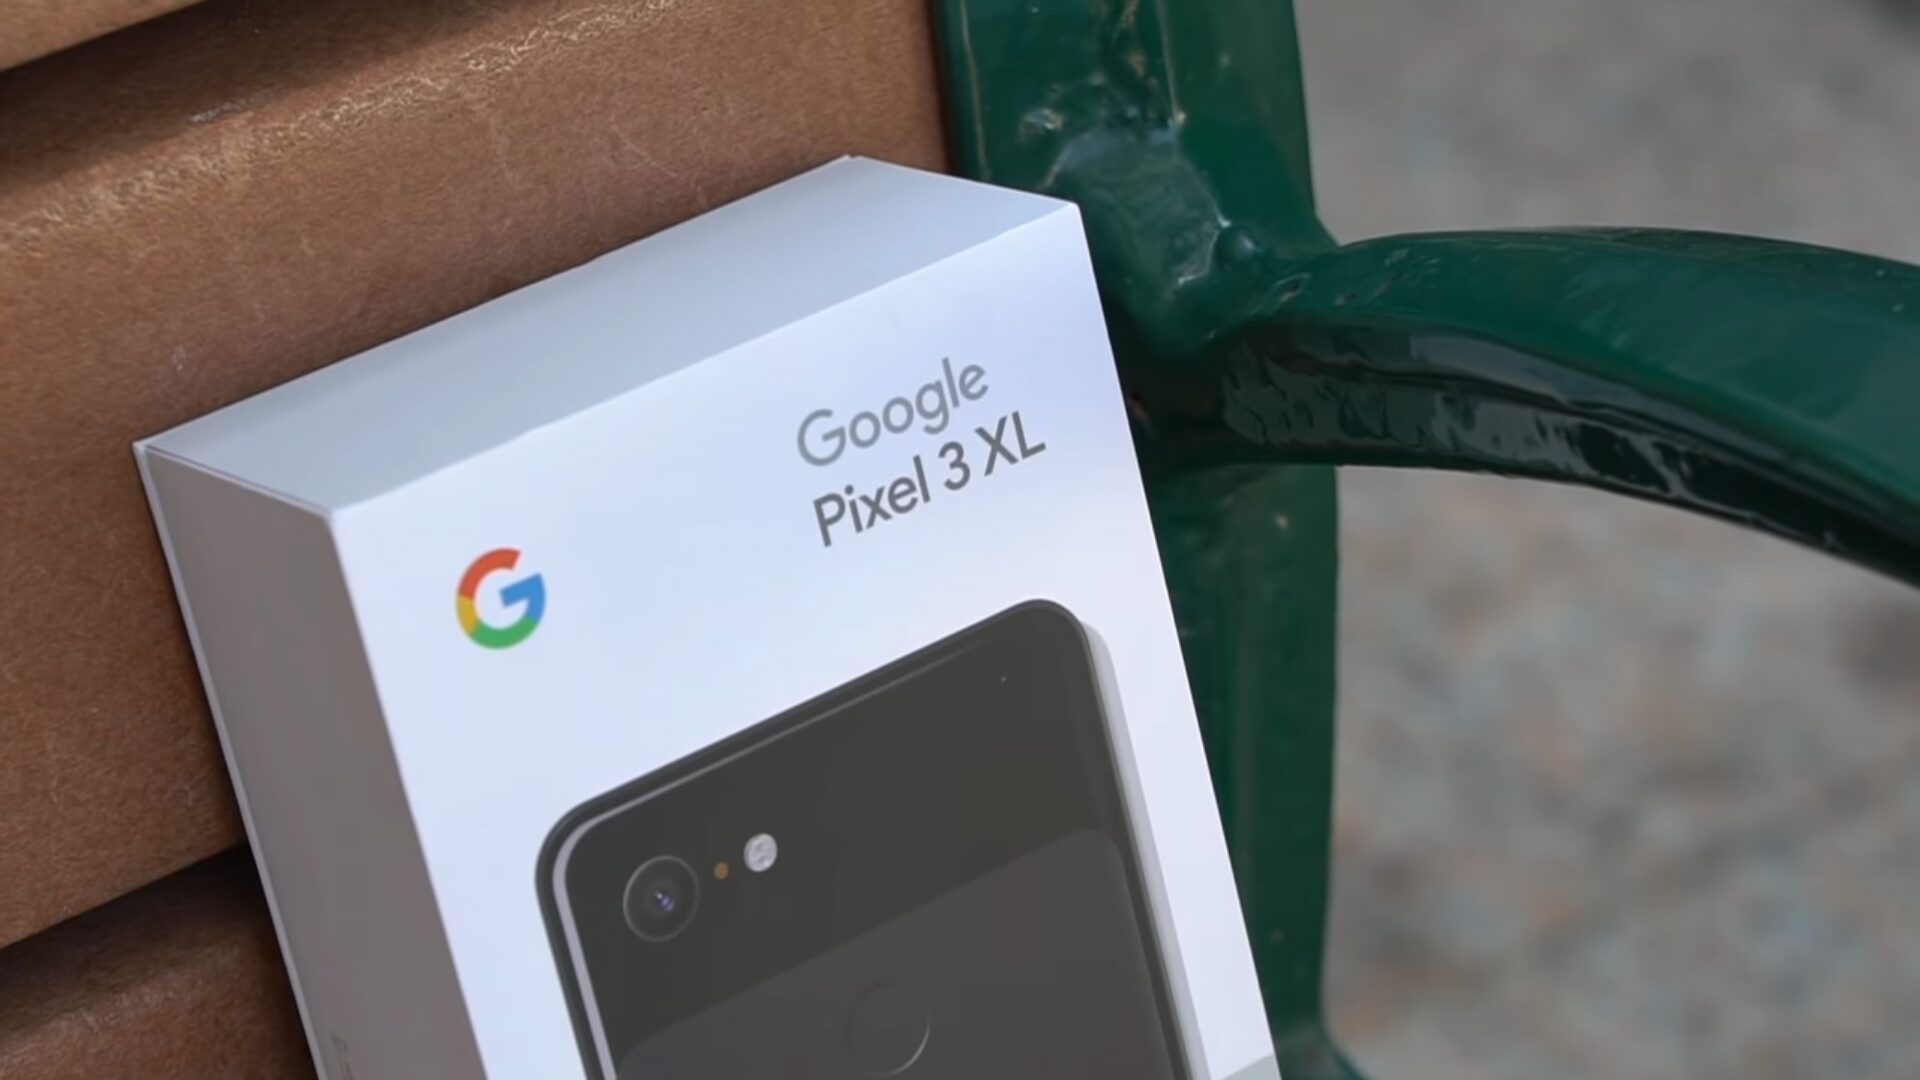 Google Pixel 3 XL Goes On Sale In Hong Kong Before Launch